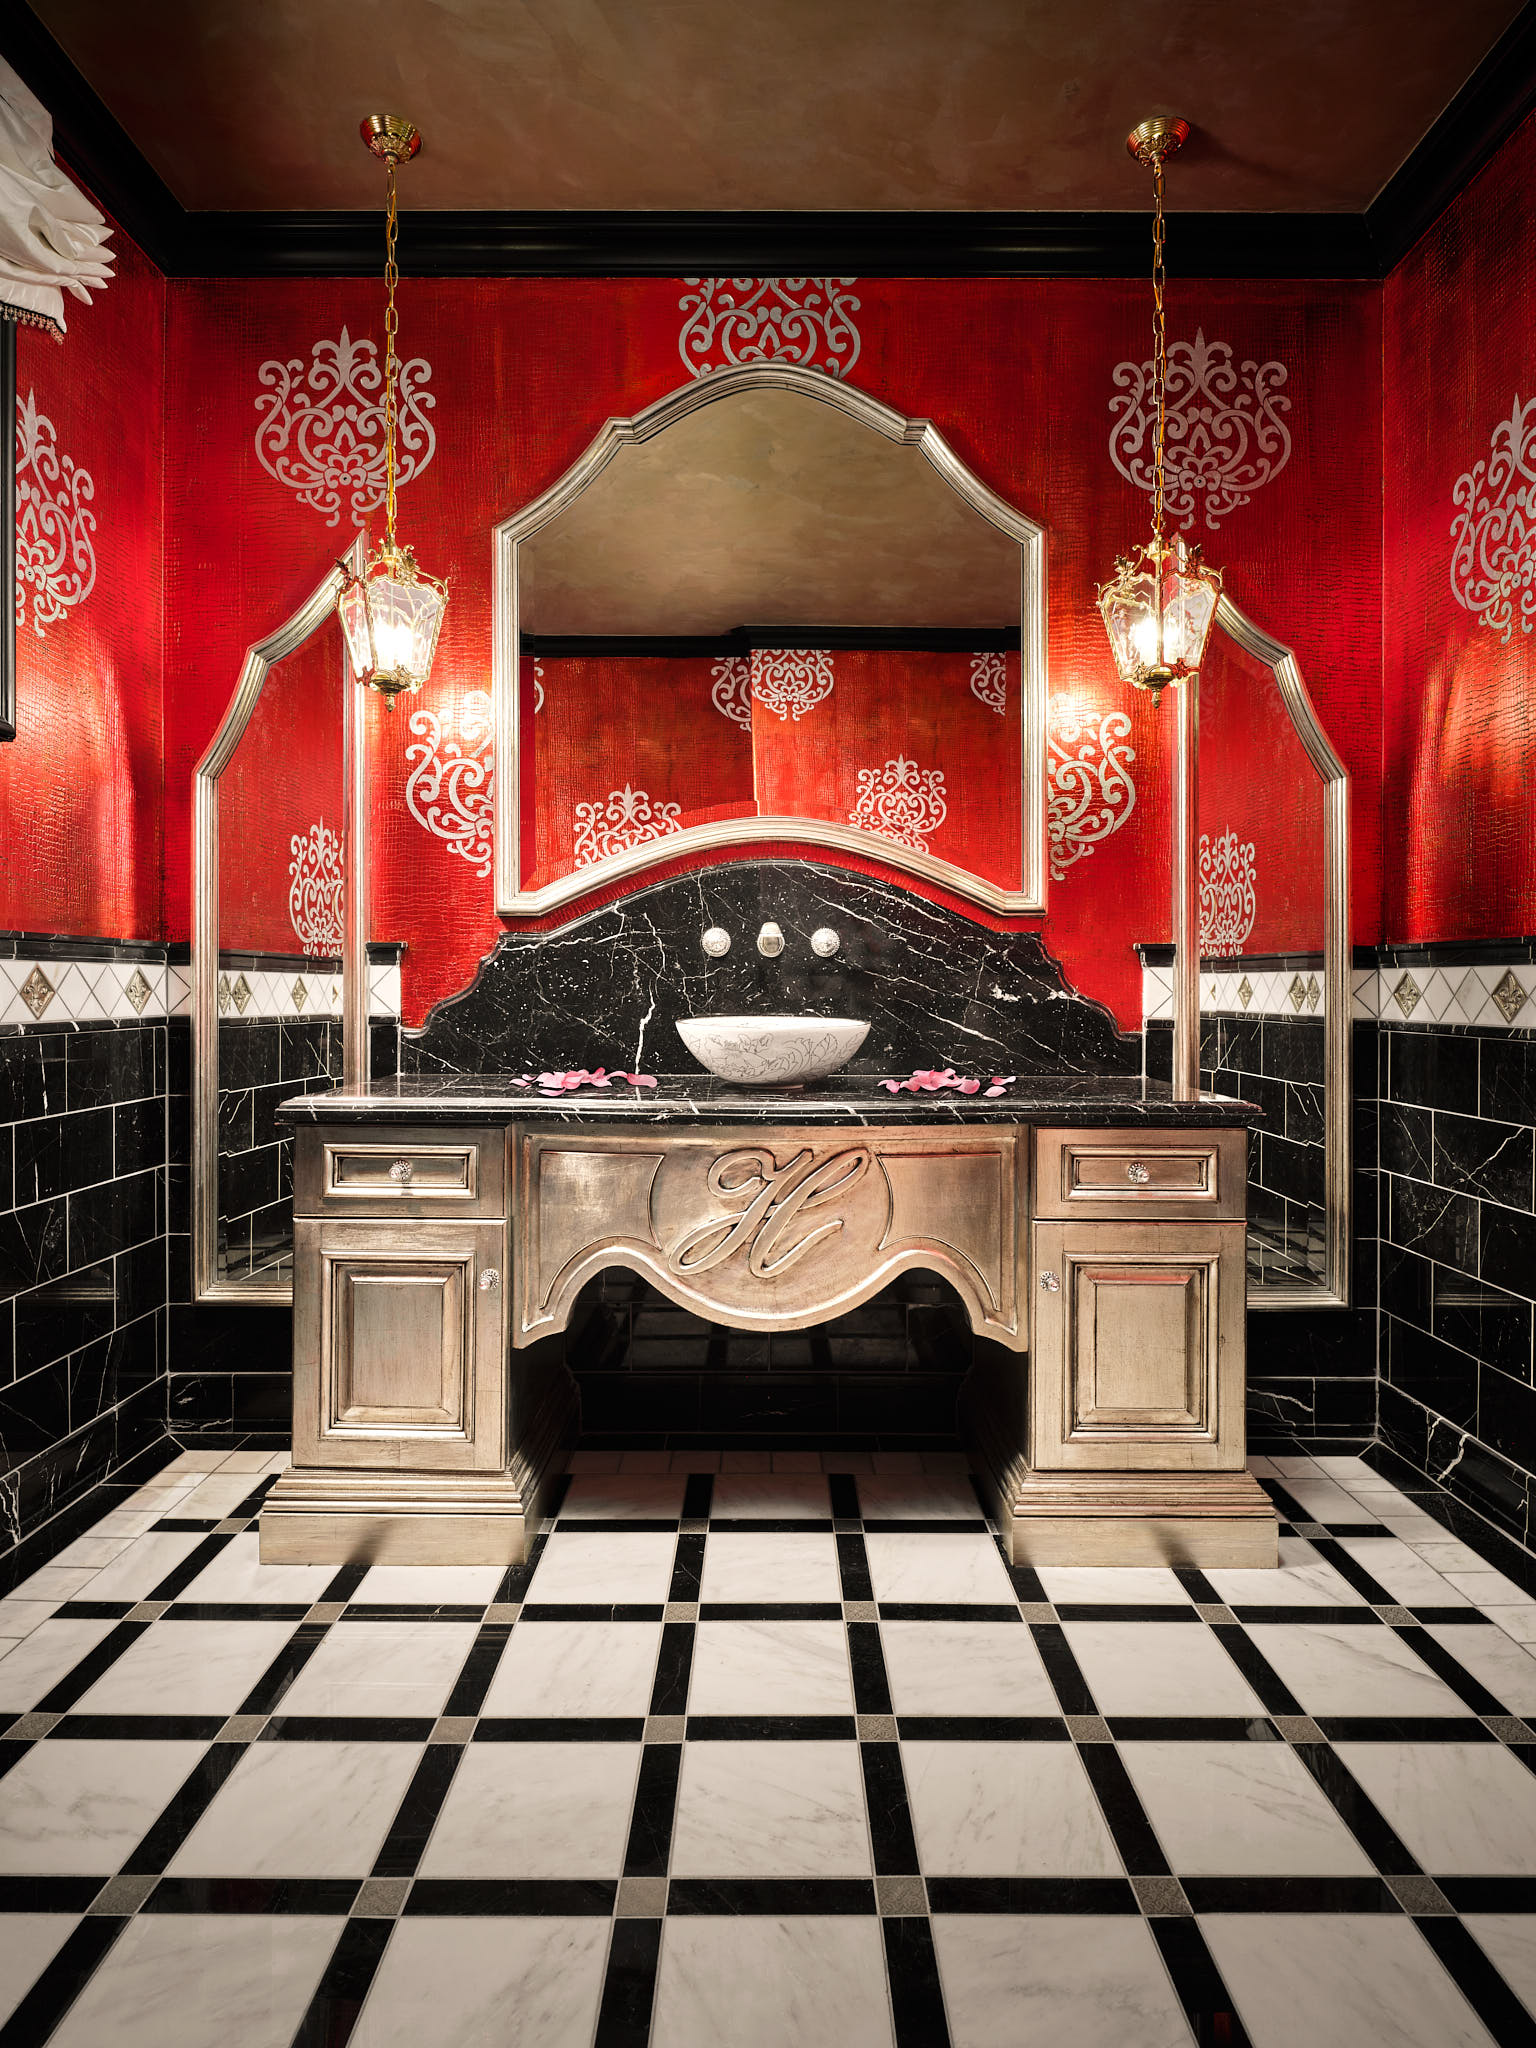 Hospitality photography by Warren Diggles. The luxurious red bathroom at HÓZHÓ Scottsdale.